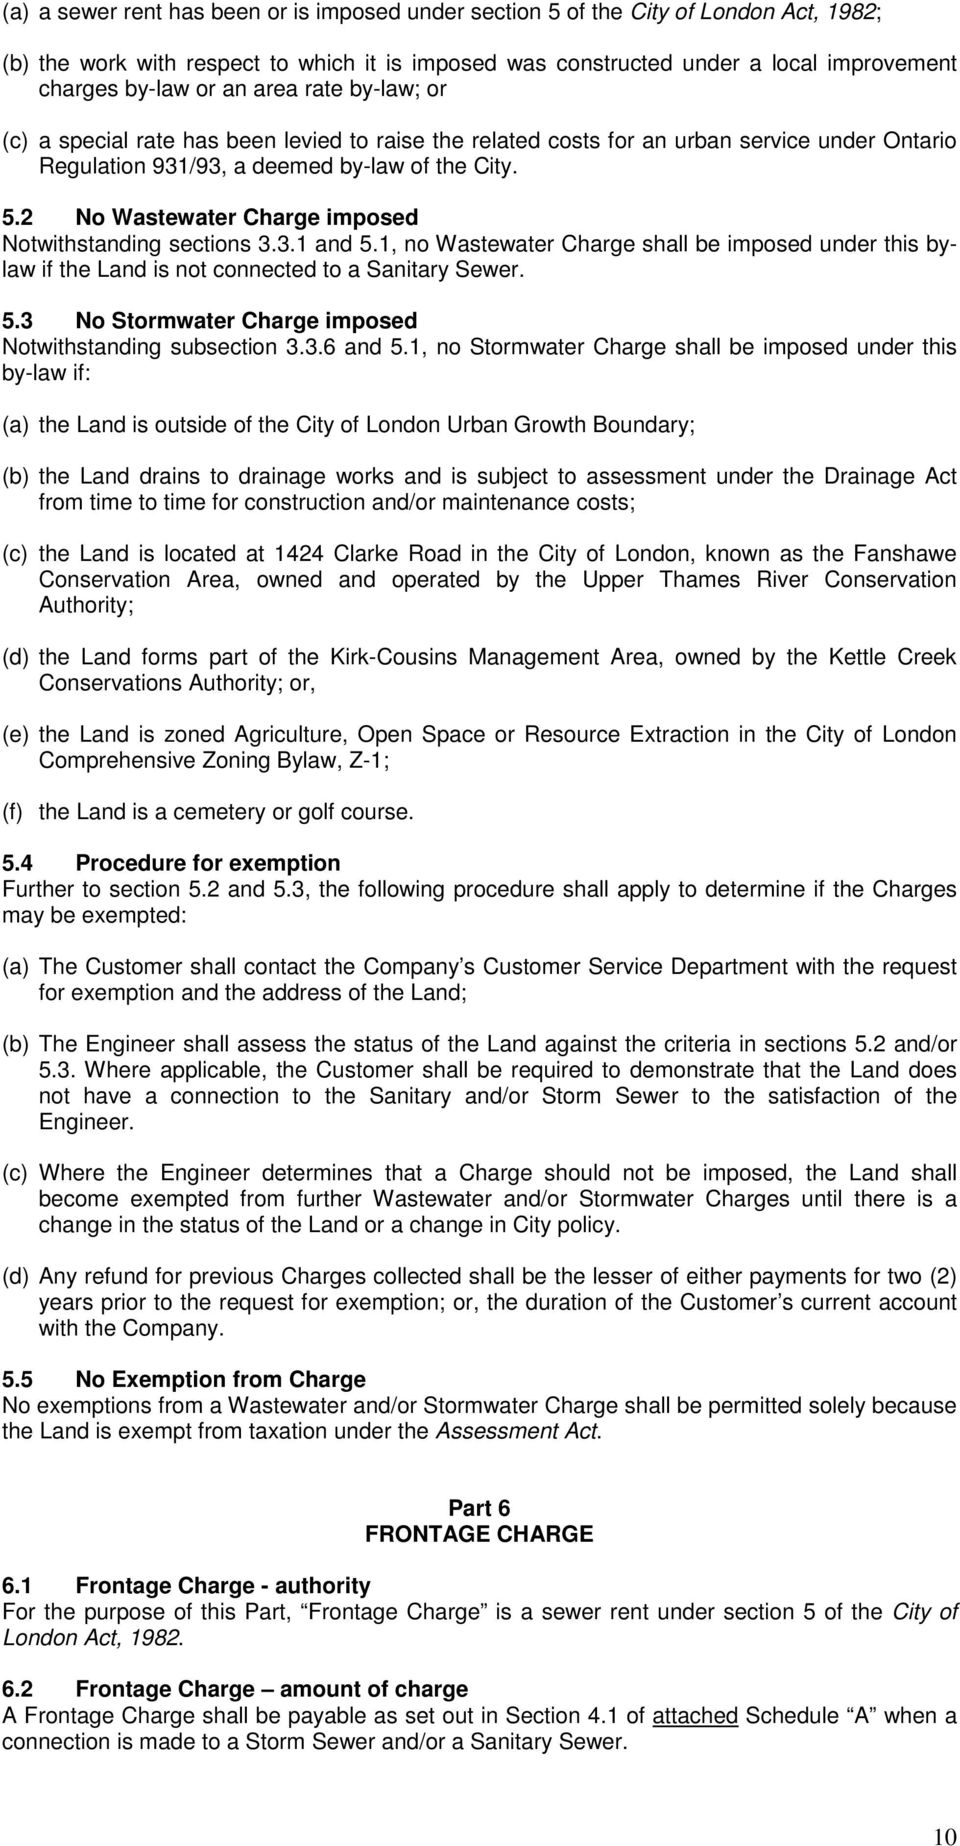 2 No Wastewater Charge imposed Notwithstanding sections 3.3.1 and 5.1, no Wastewater Charge shall be imposed under this bylaw if the Land is not connected to a Sanitary Sewer. 5.3 No Stormwater Charge imposed Notwithstanding subsection 3.